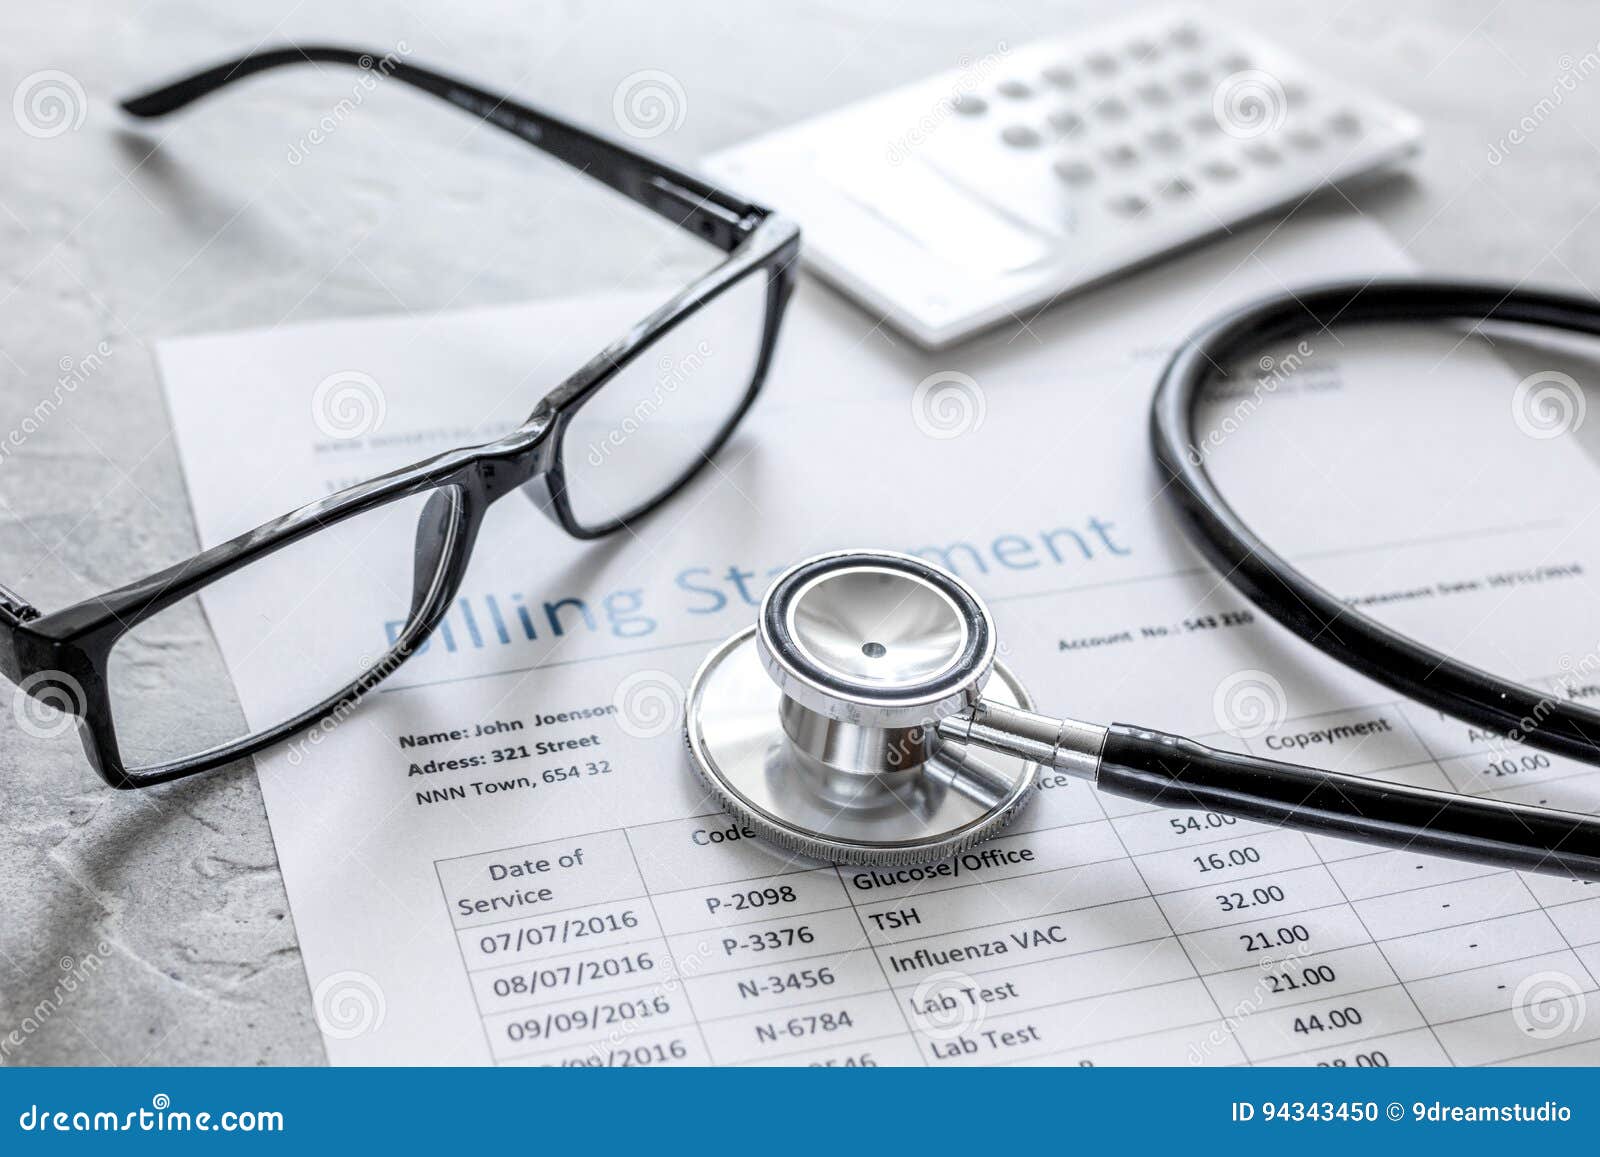 medical treatmant billing statement with stethoscope and glasses on stone background